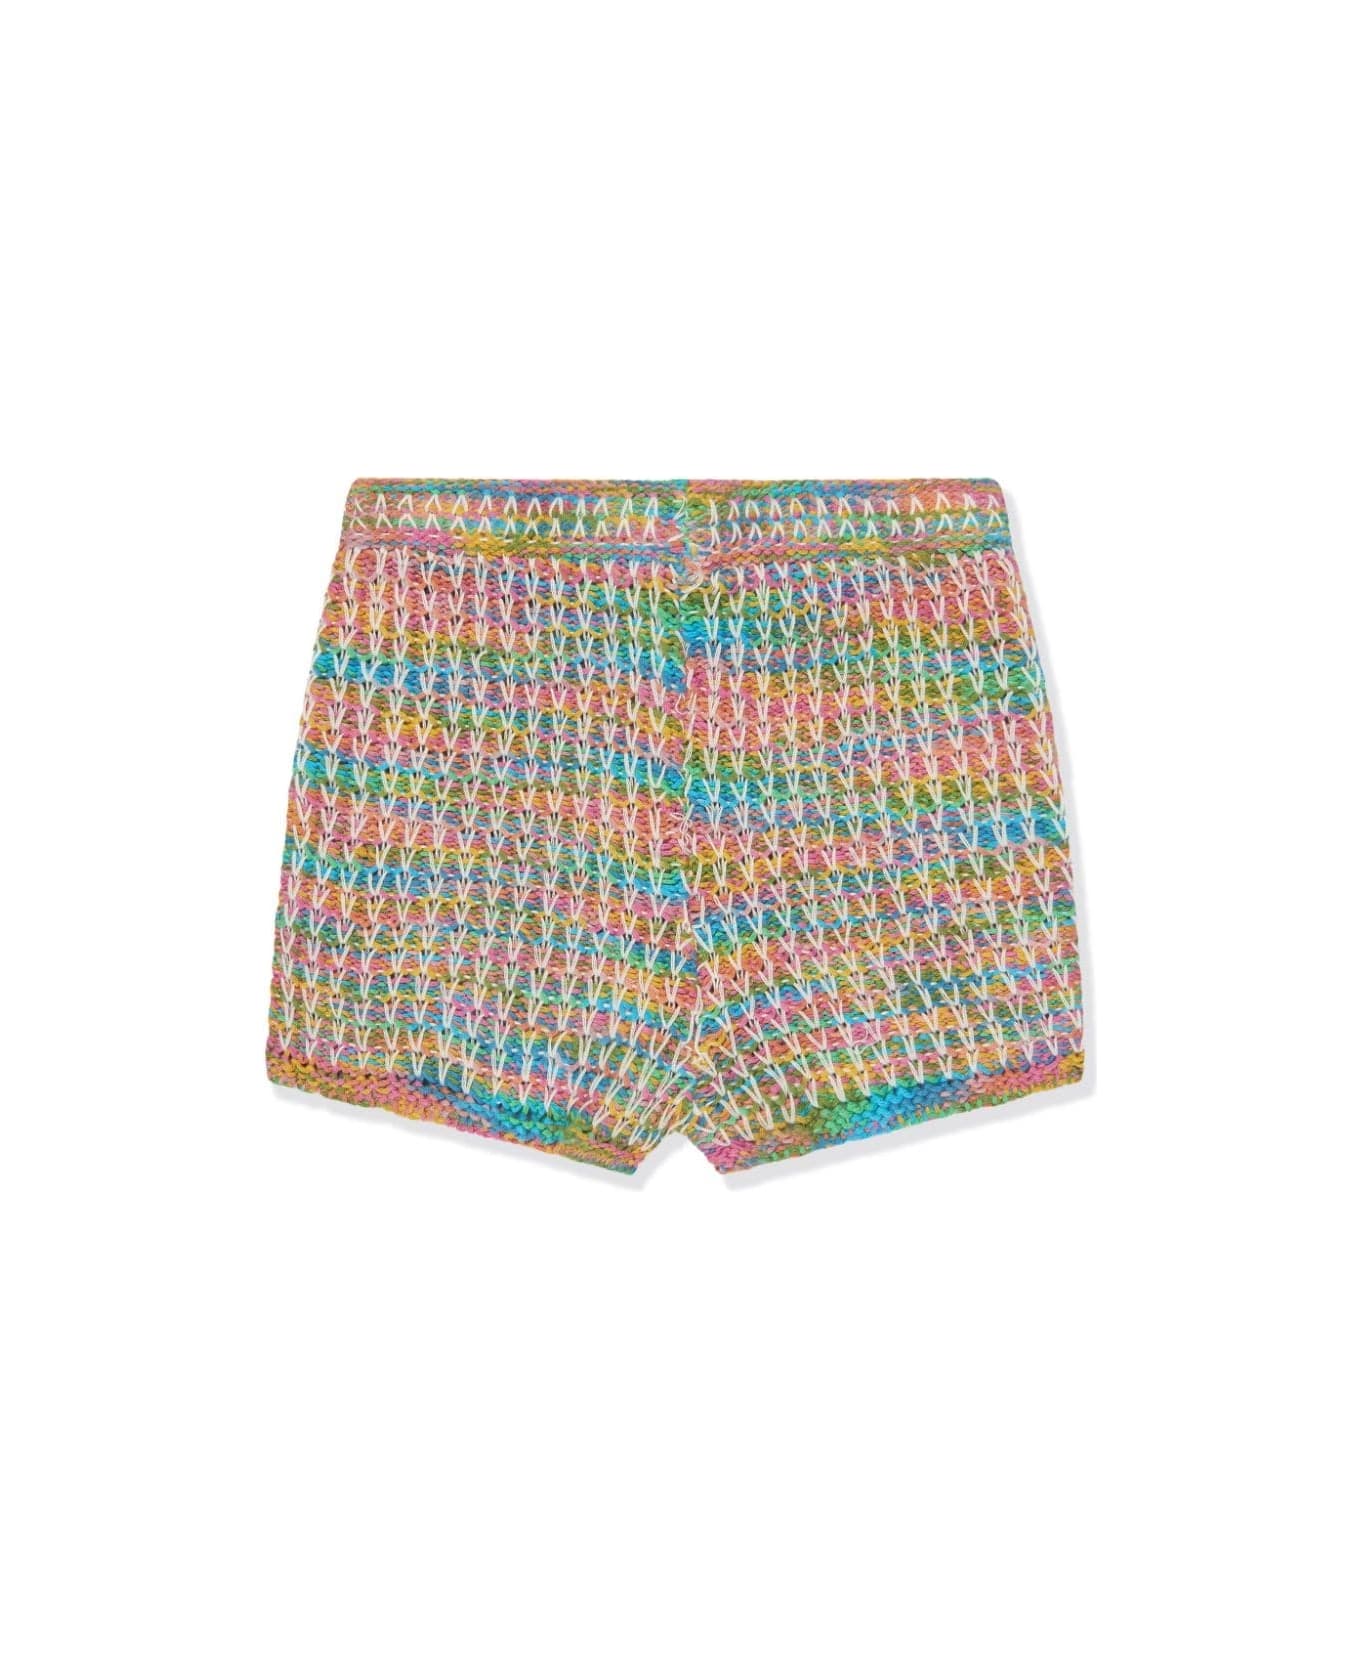 Zimmermann Shorts All'uncinetto August - Multicolor ボトムス